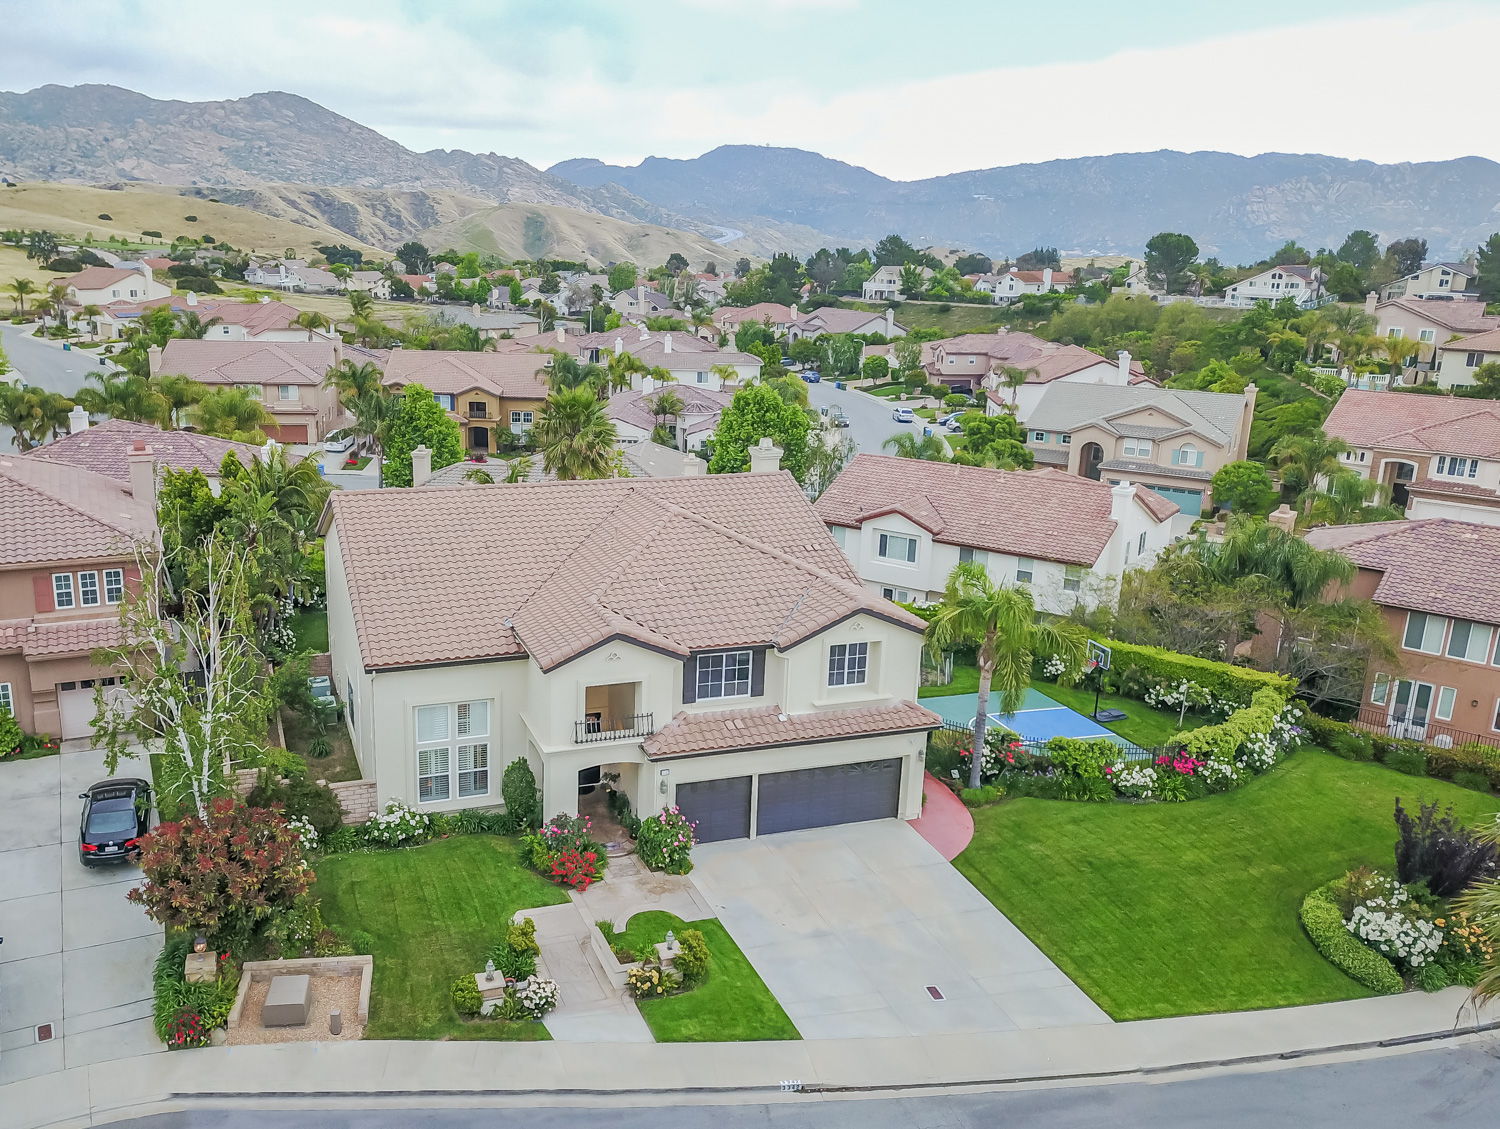  3342 Wolf Creek Ct, Simi Valley, CA 93063, US